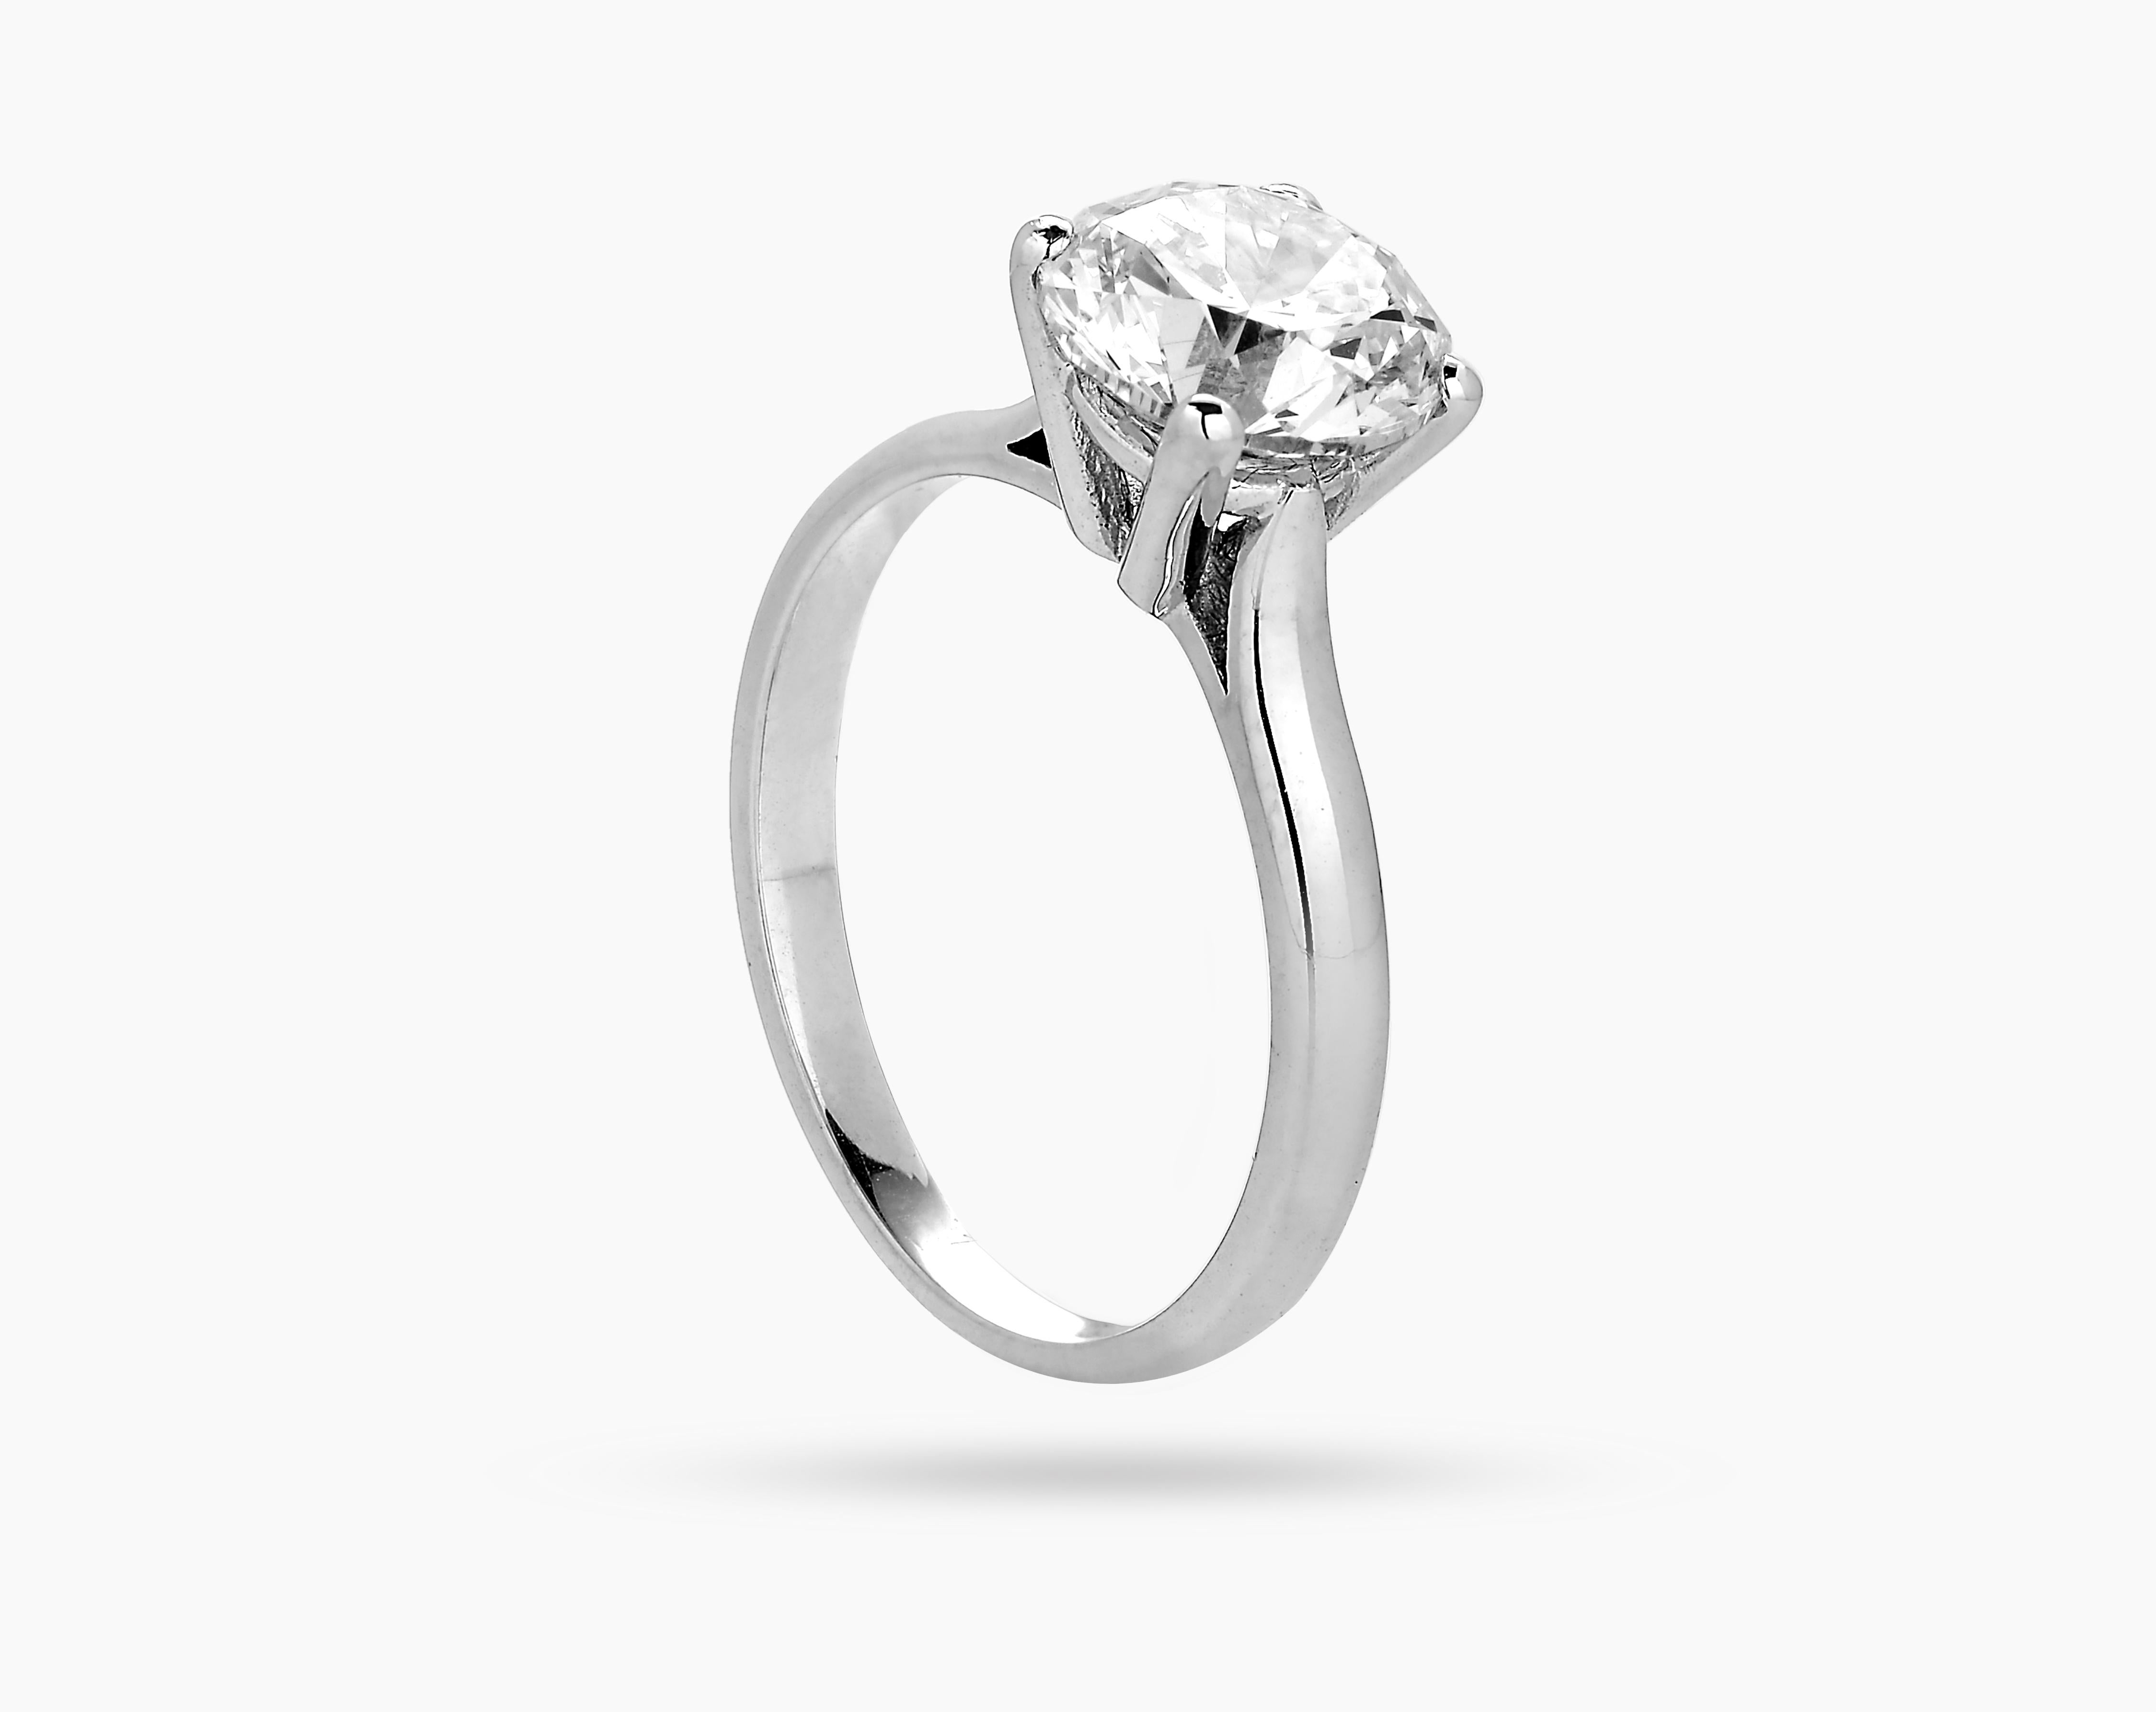 HRD (Antwerp diamond high council) certified 2.01 carat H-VS2 round diamond engagement ring. Round brilliant cut solitaire engagement ring with H color VS2 clarity center stone from CARON Fine jewellery.

A timeless classic is this engagement ring,